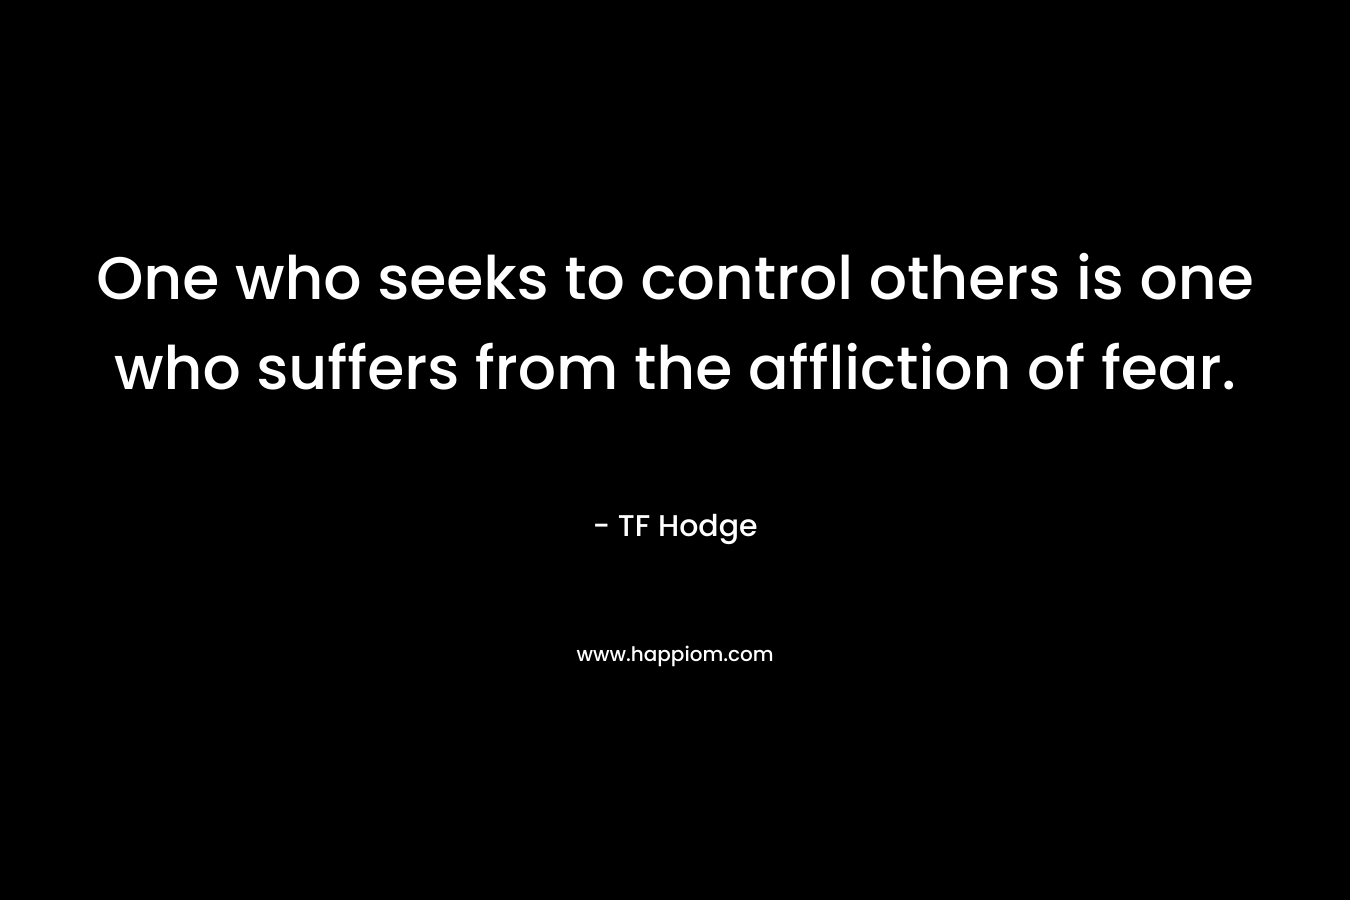 One who seeks to control others is one who suffers from the affliction of fear.